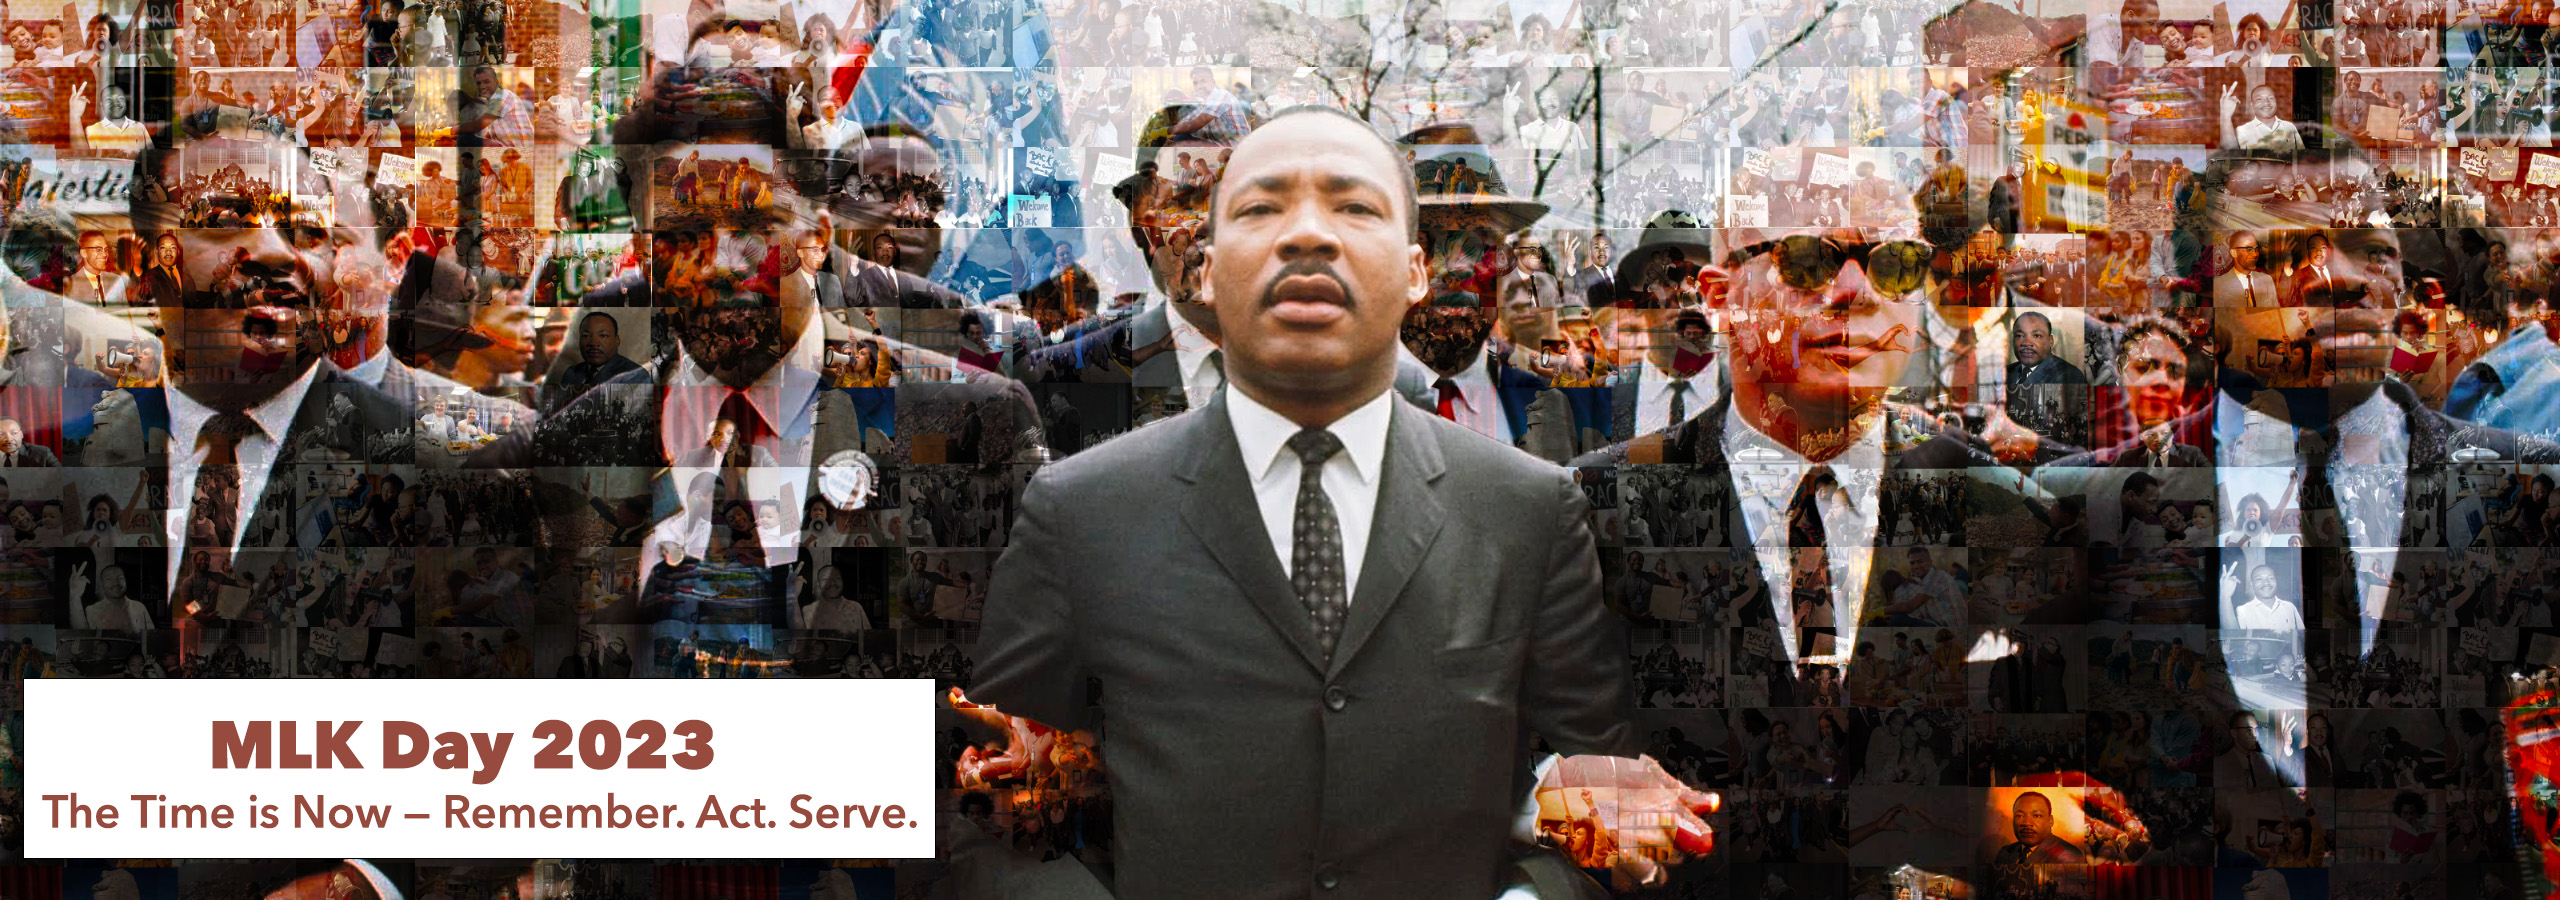 Collage of photos from Dr. Martin Luther King, Jr.'s life, and images demonstrating acts of service and protests.